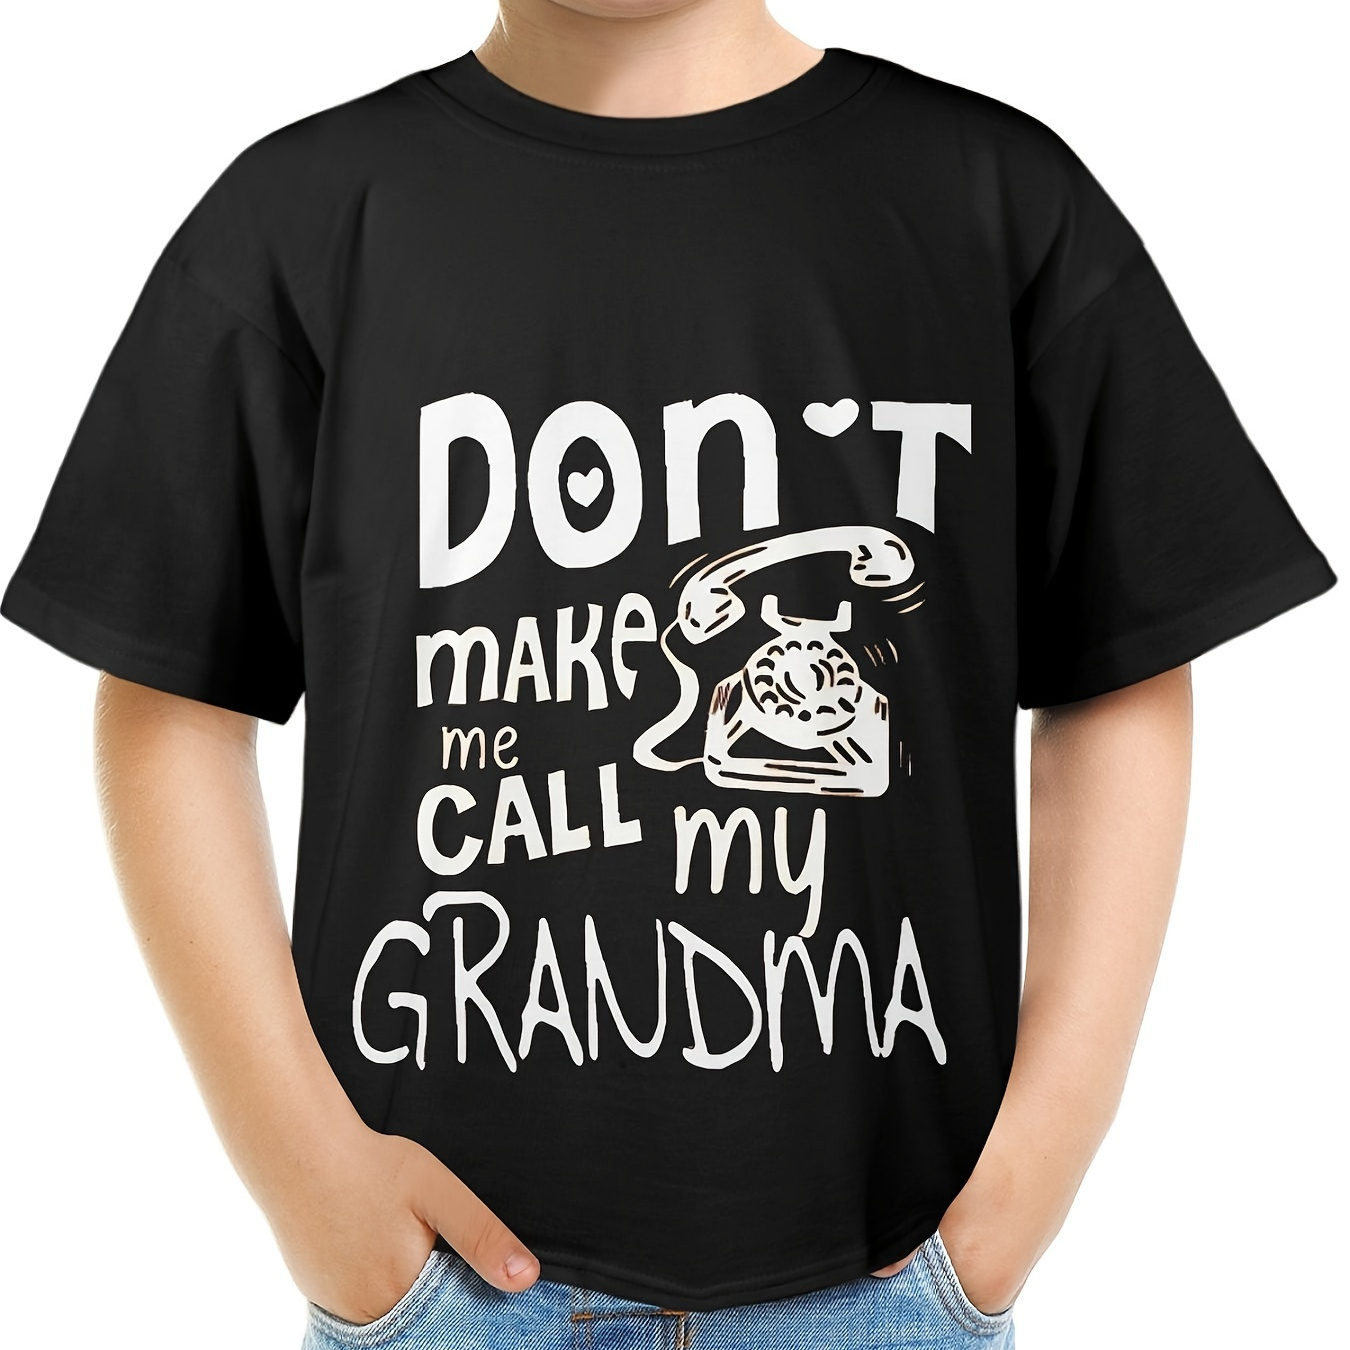 

Don't Make Me Call My Grandma Letter Print Boys T-shirt - Vibrant Short Sleeve Tee For Summer Fun - Casual Style For Boys And Girls